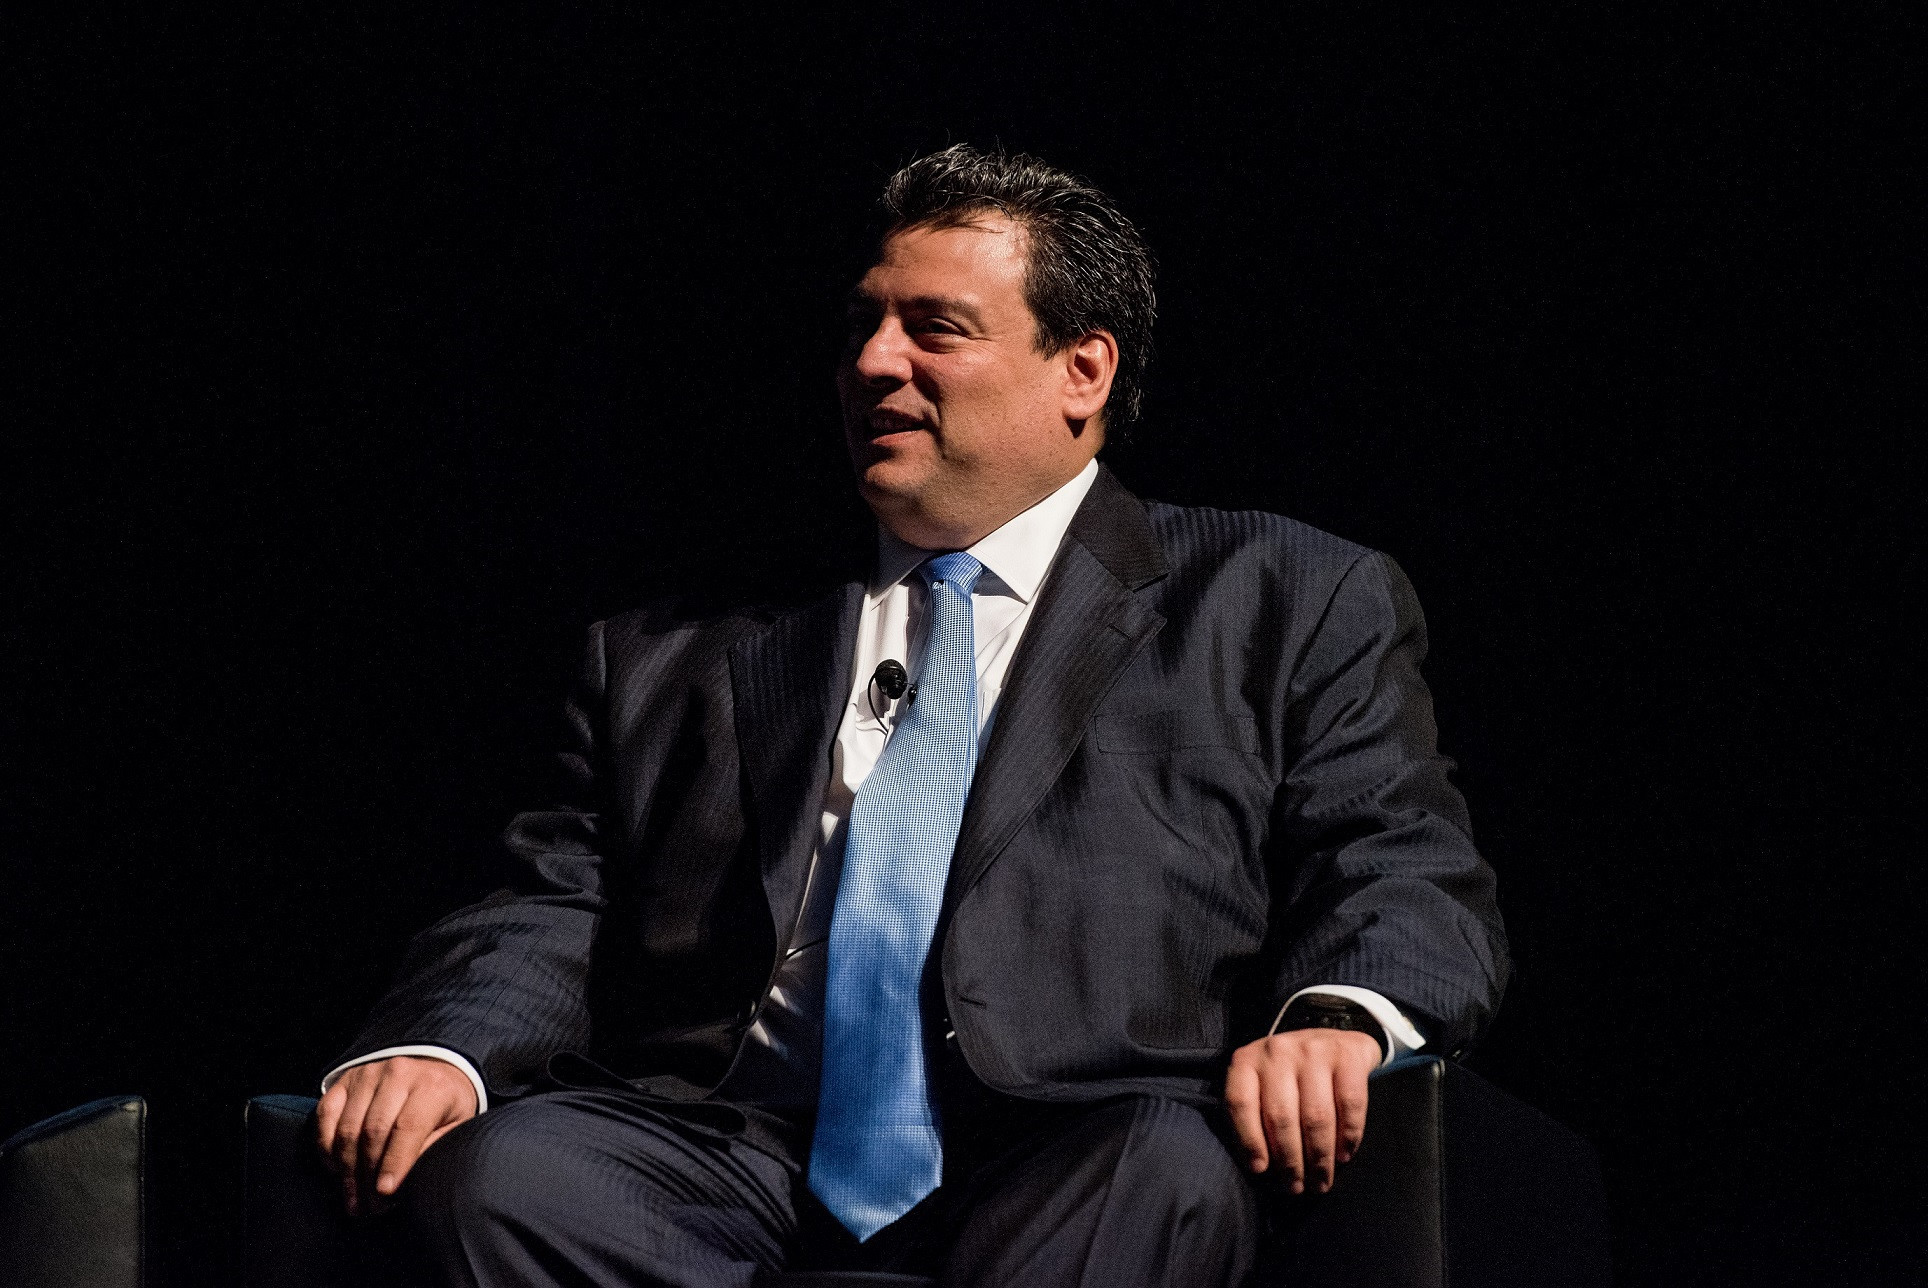 WBC President Mauricio Sulaimán insisted that the governing body is 